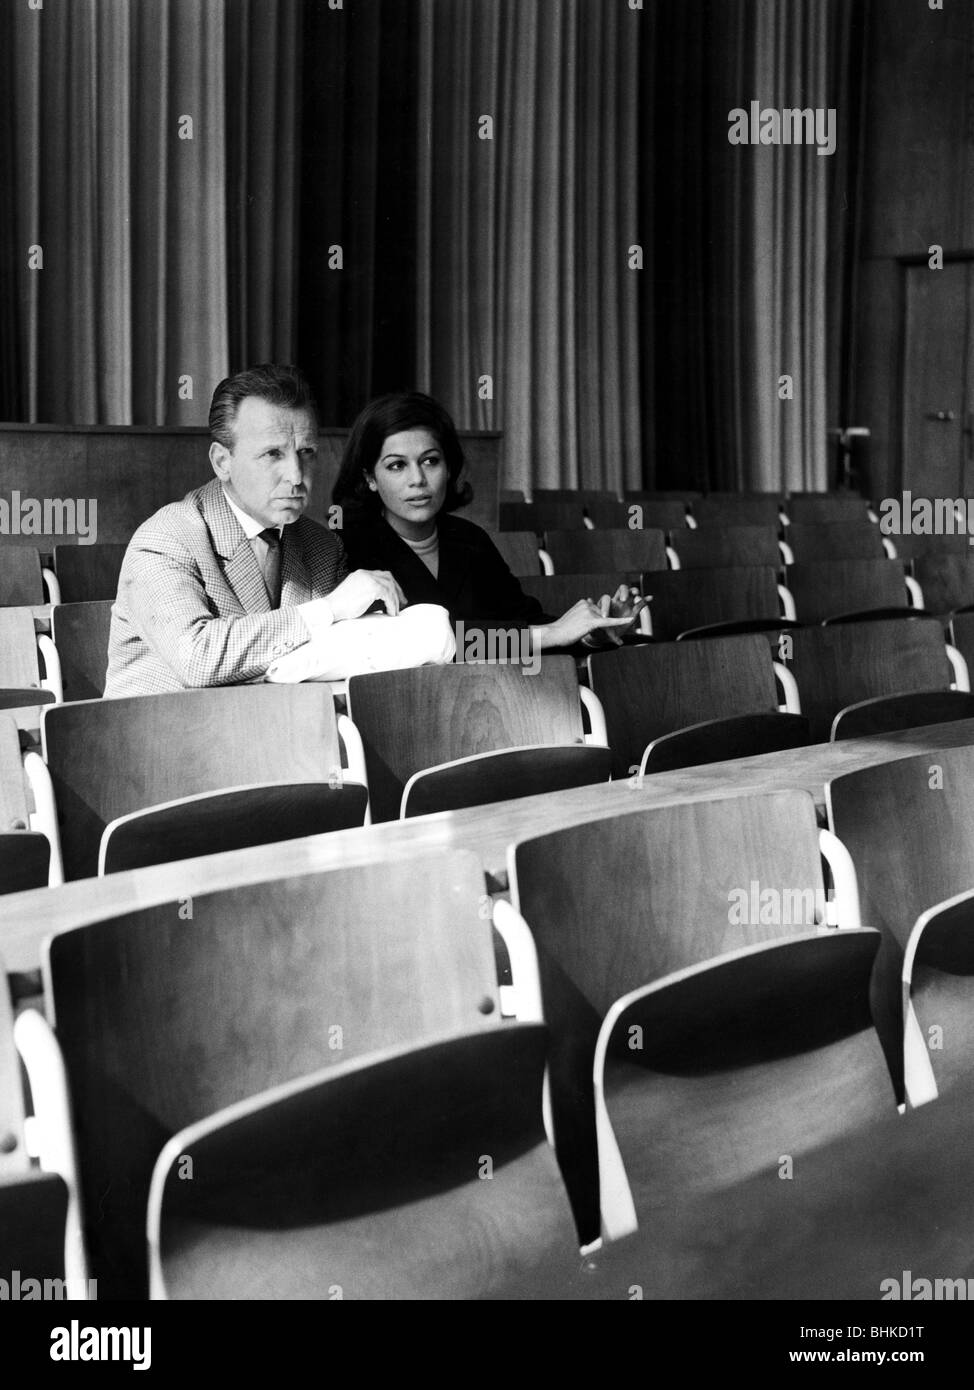 Elsner, Hannelore, * 26.7.1942, German actress, with Georg Thomalla, in an auditorium of the University Dental Clinic Berlin, May 1965, Stock Photo